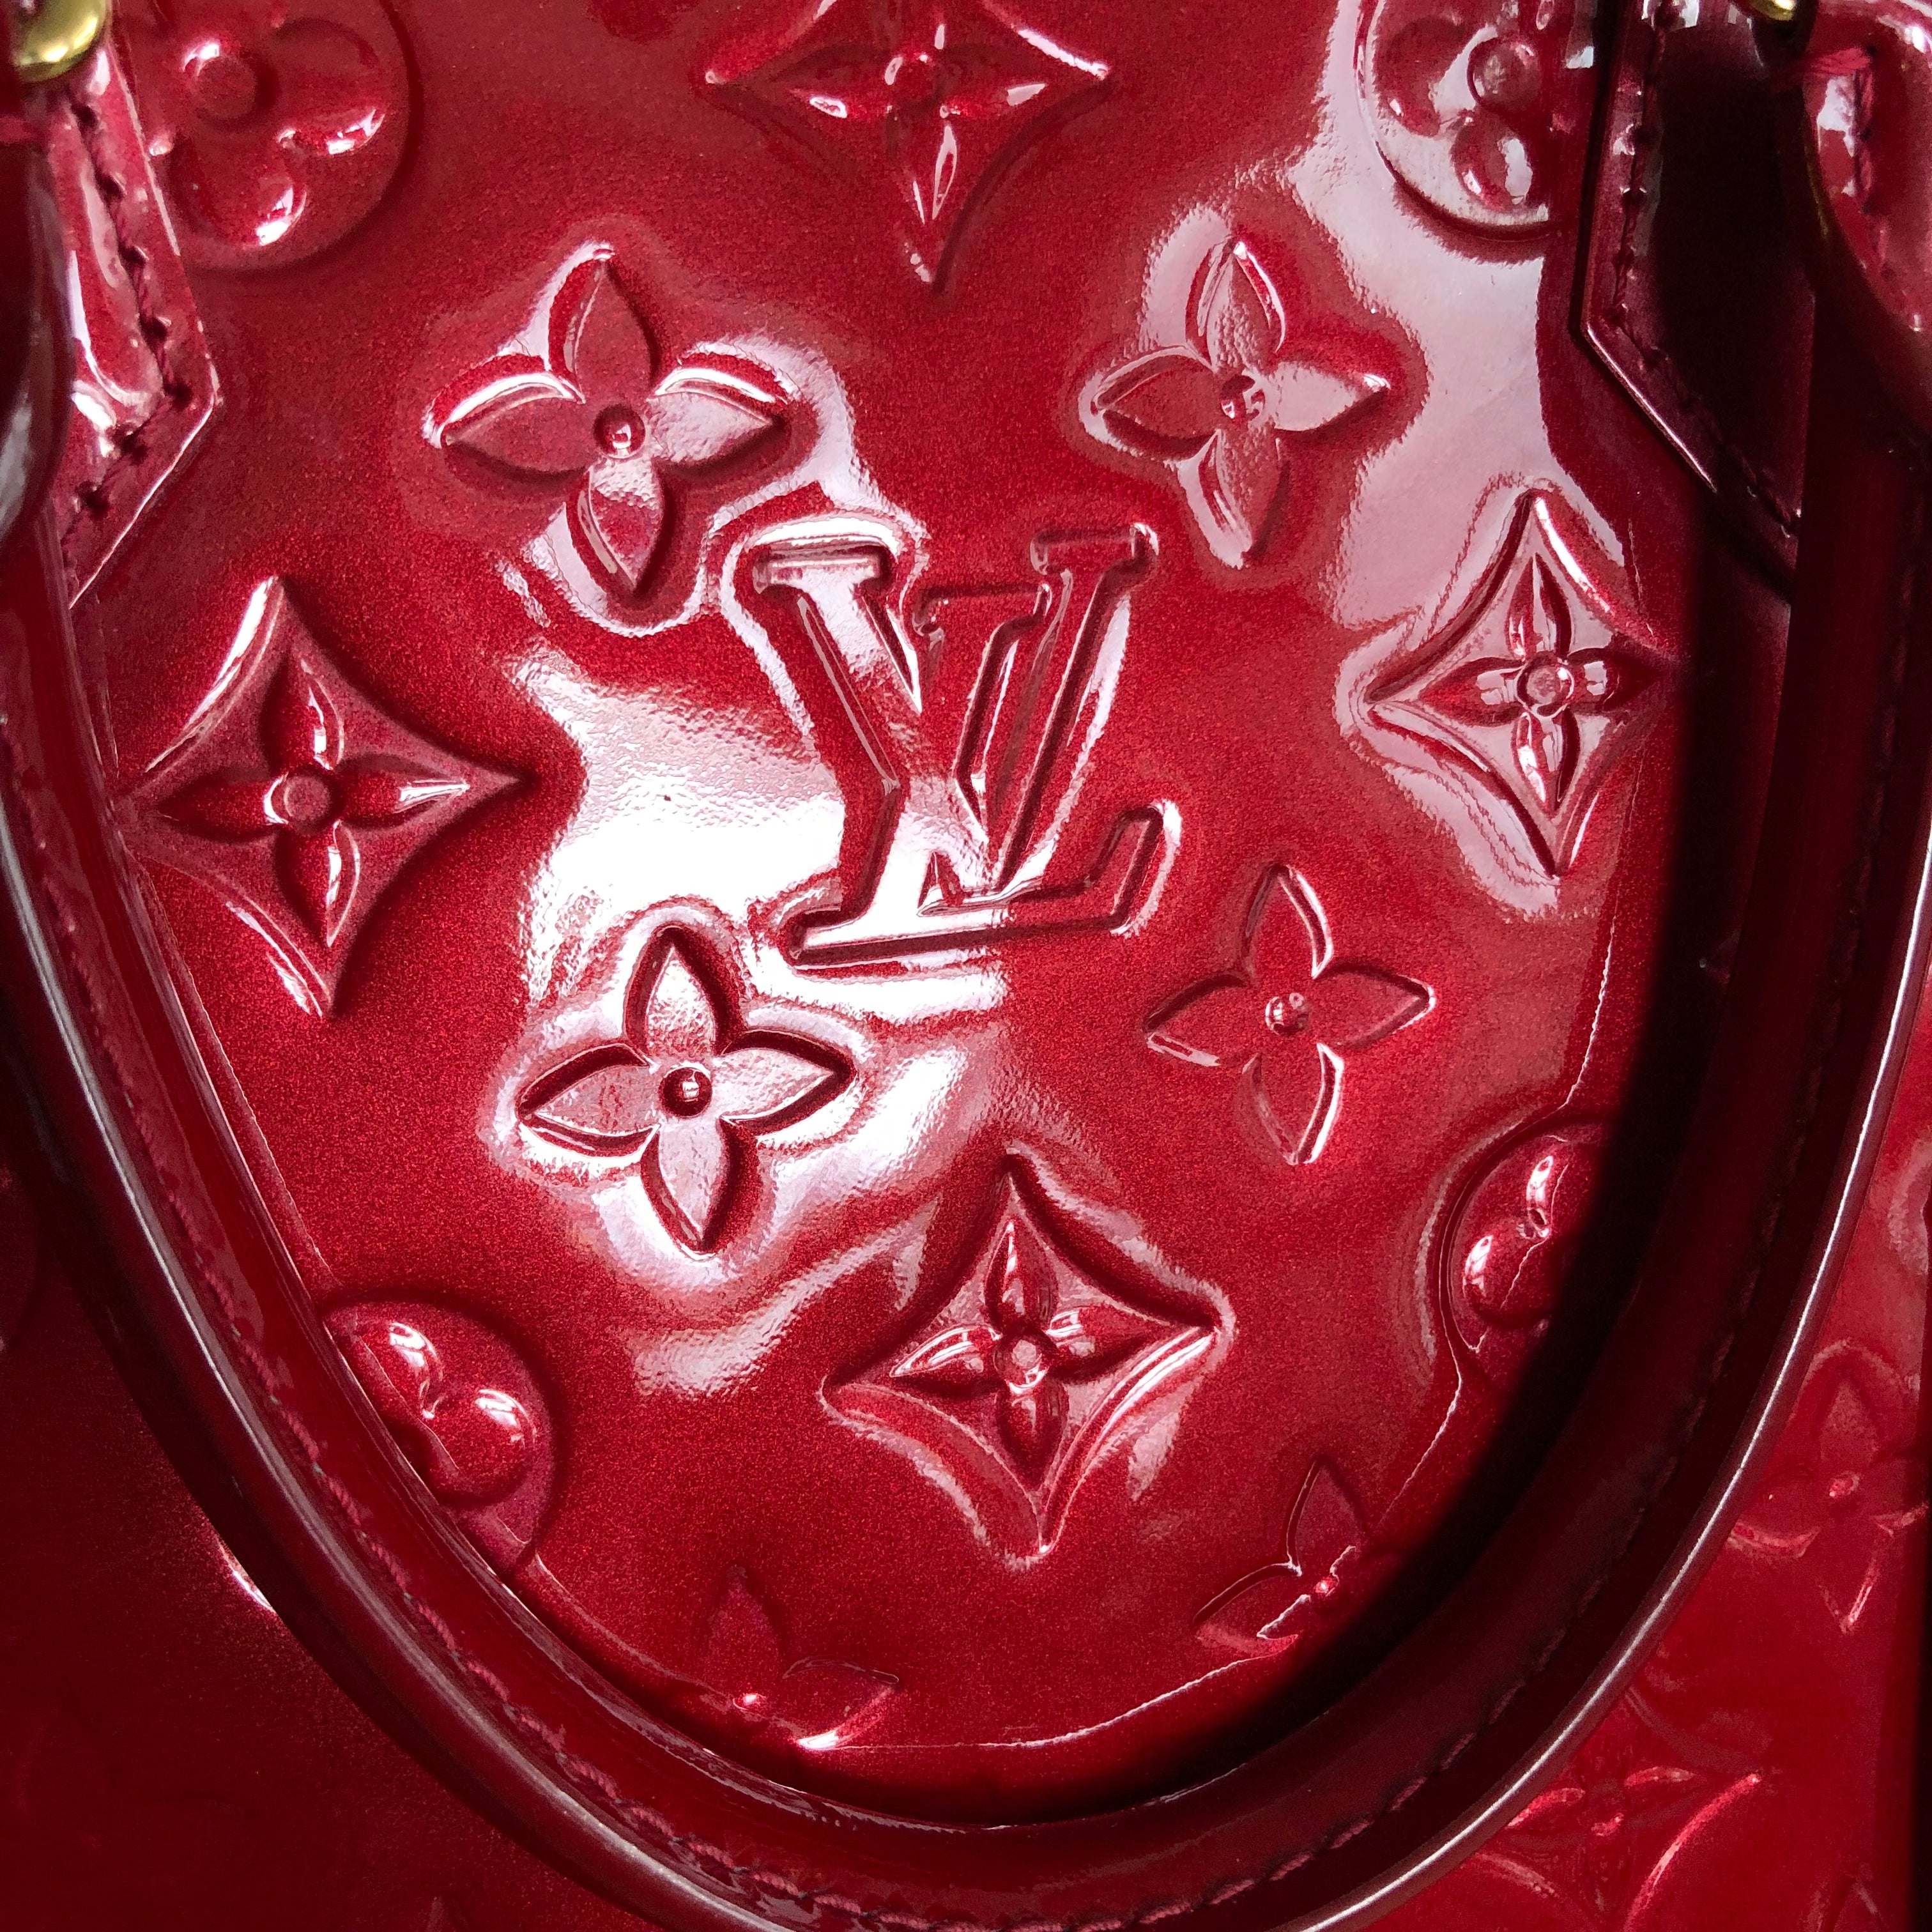 LOUIS VUITTON Vernis Alma MM Pomme D'Amour Red Patent Leather